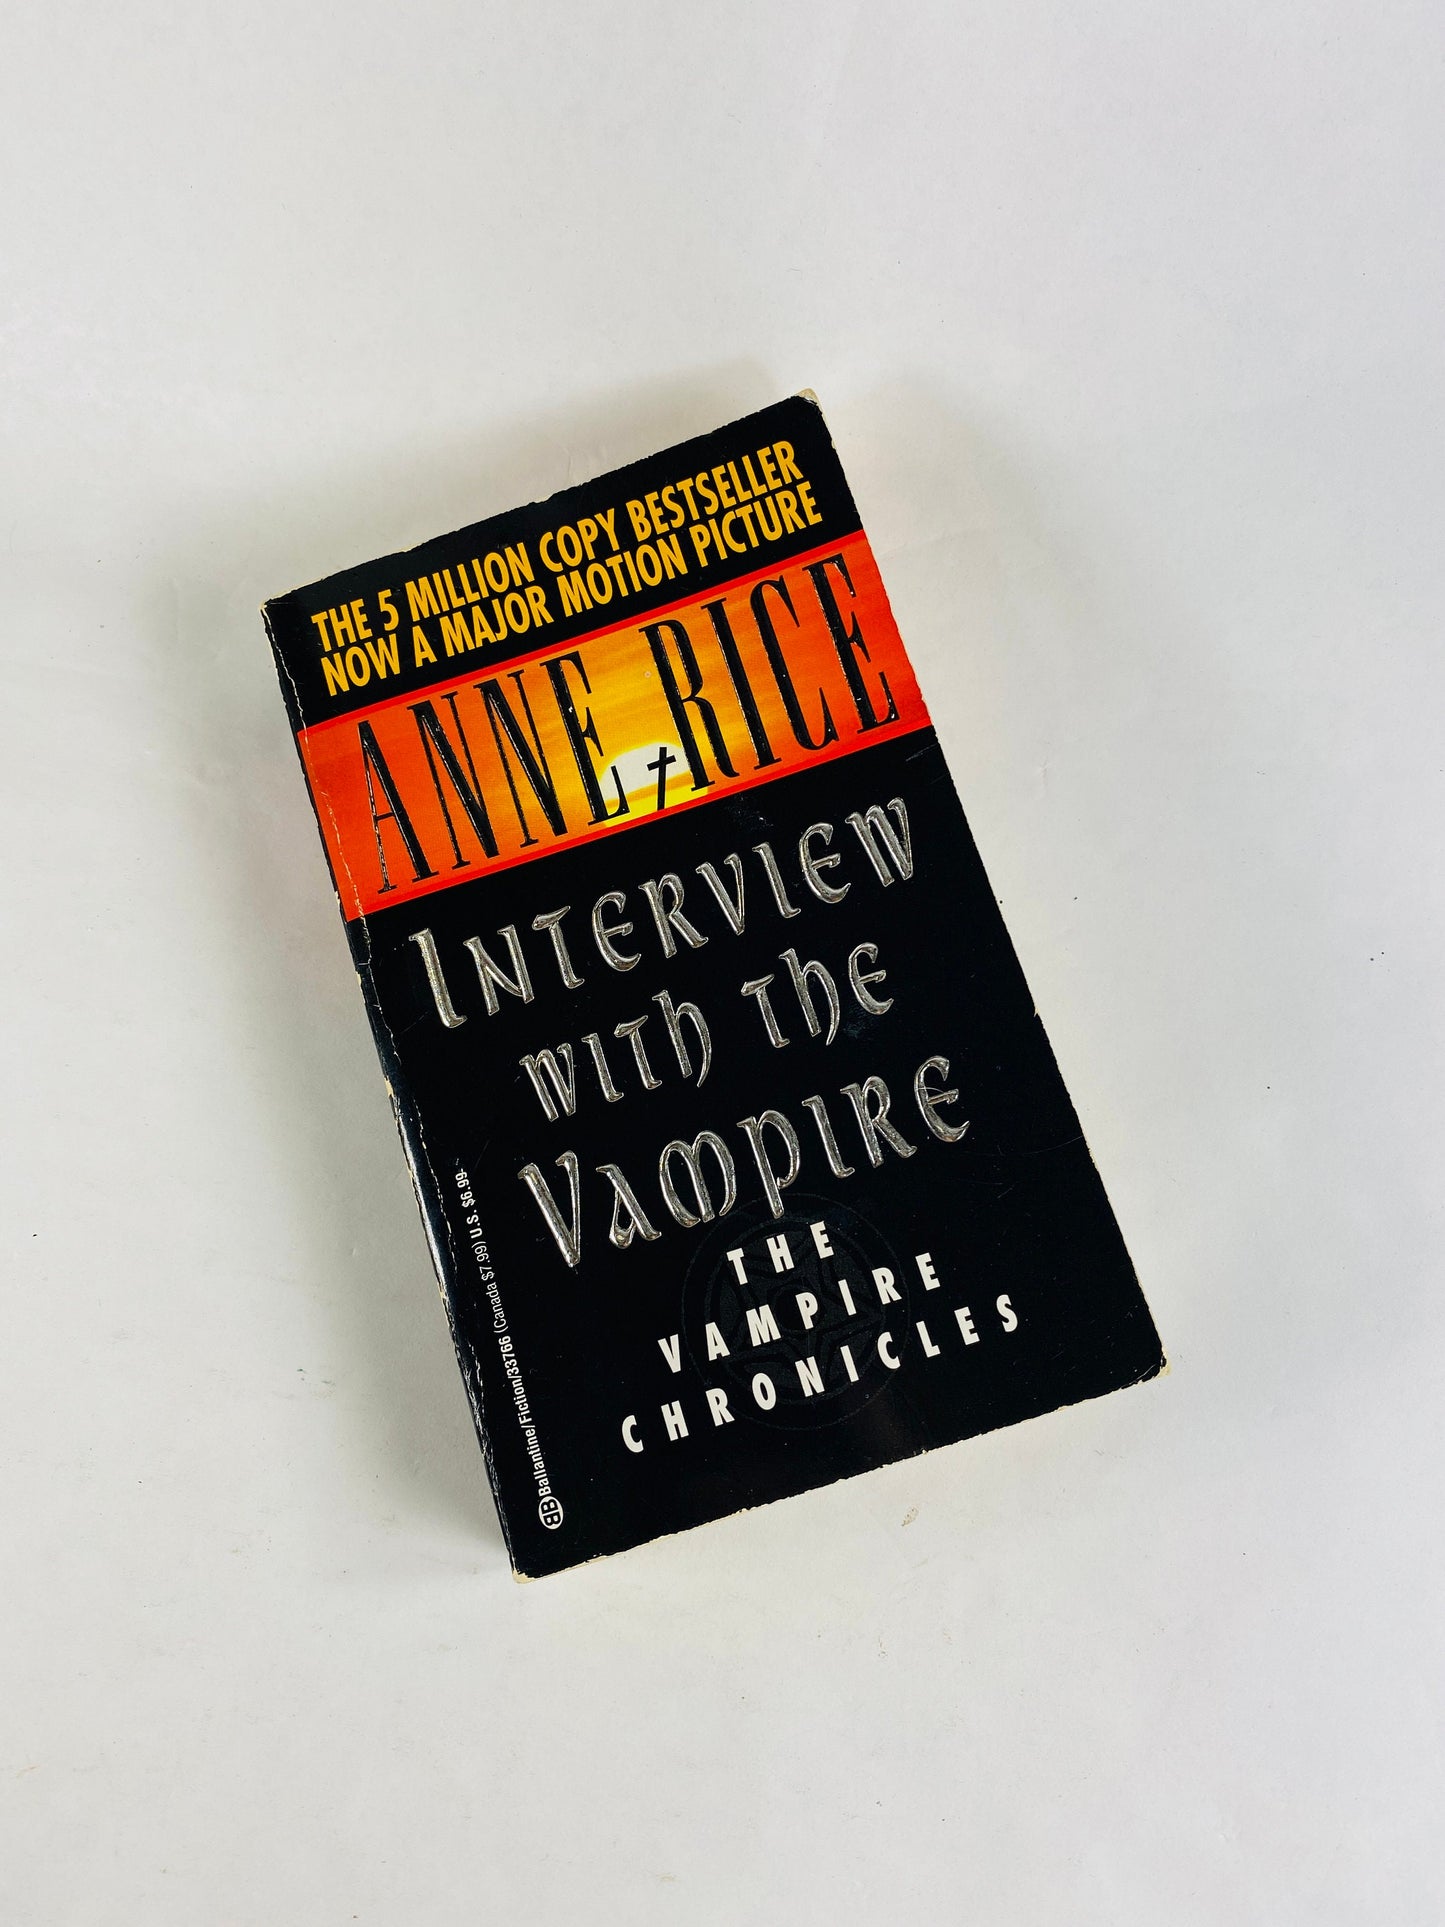 Interview with a Vampire by Anne Rice. Early Printing vintage paperback Historical horror. Gold book decor. Collectible gift.